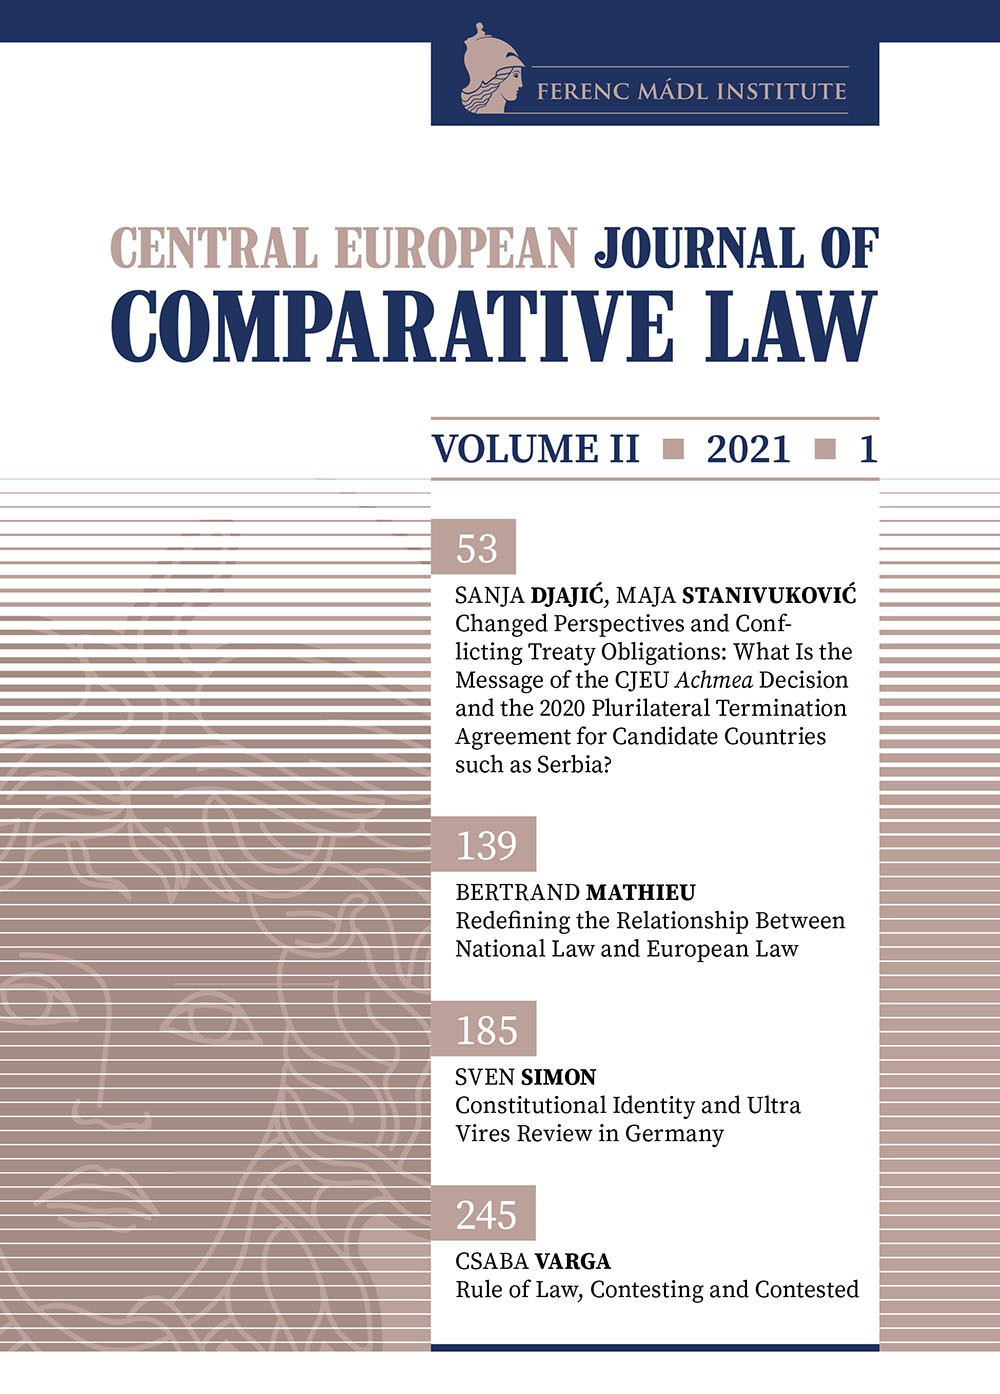 Intergenerational Transfer of Family-run Enterprises by Means of Civil Law in Serbia